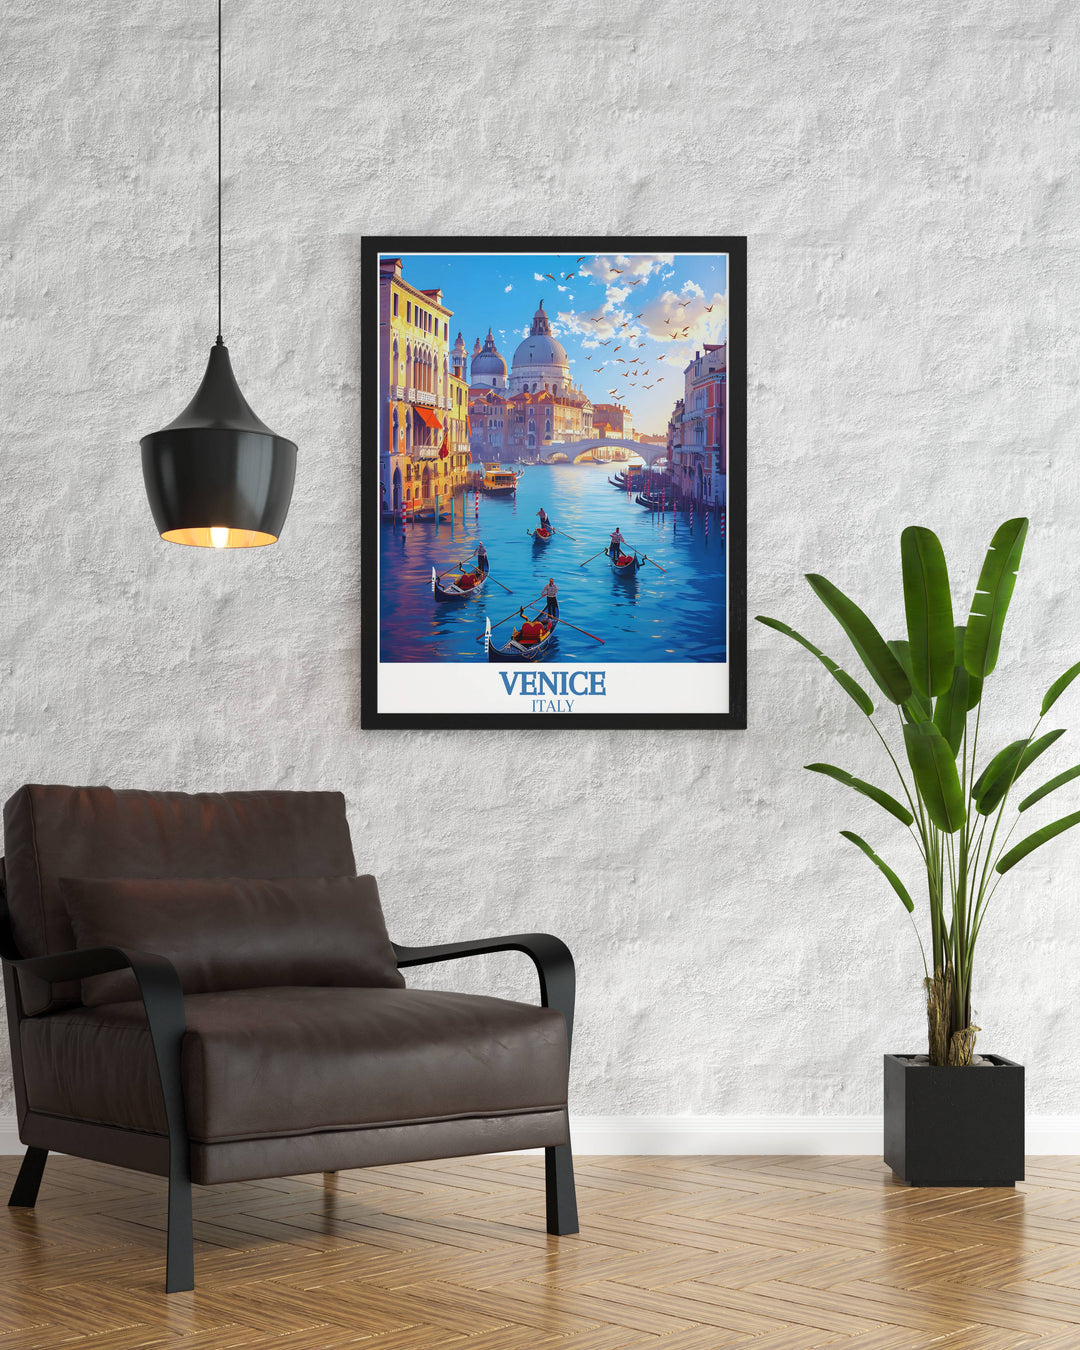 Beautiful travel poster of Venices Grand Canal, highlighting the picturesque scenery and iconic landmarks, such as the Rialto Bridge, evoking the charm and romance of this magical city, ideal for creating a sophisticated gallery wall.